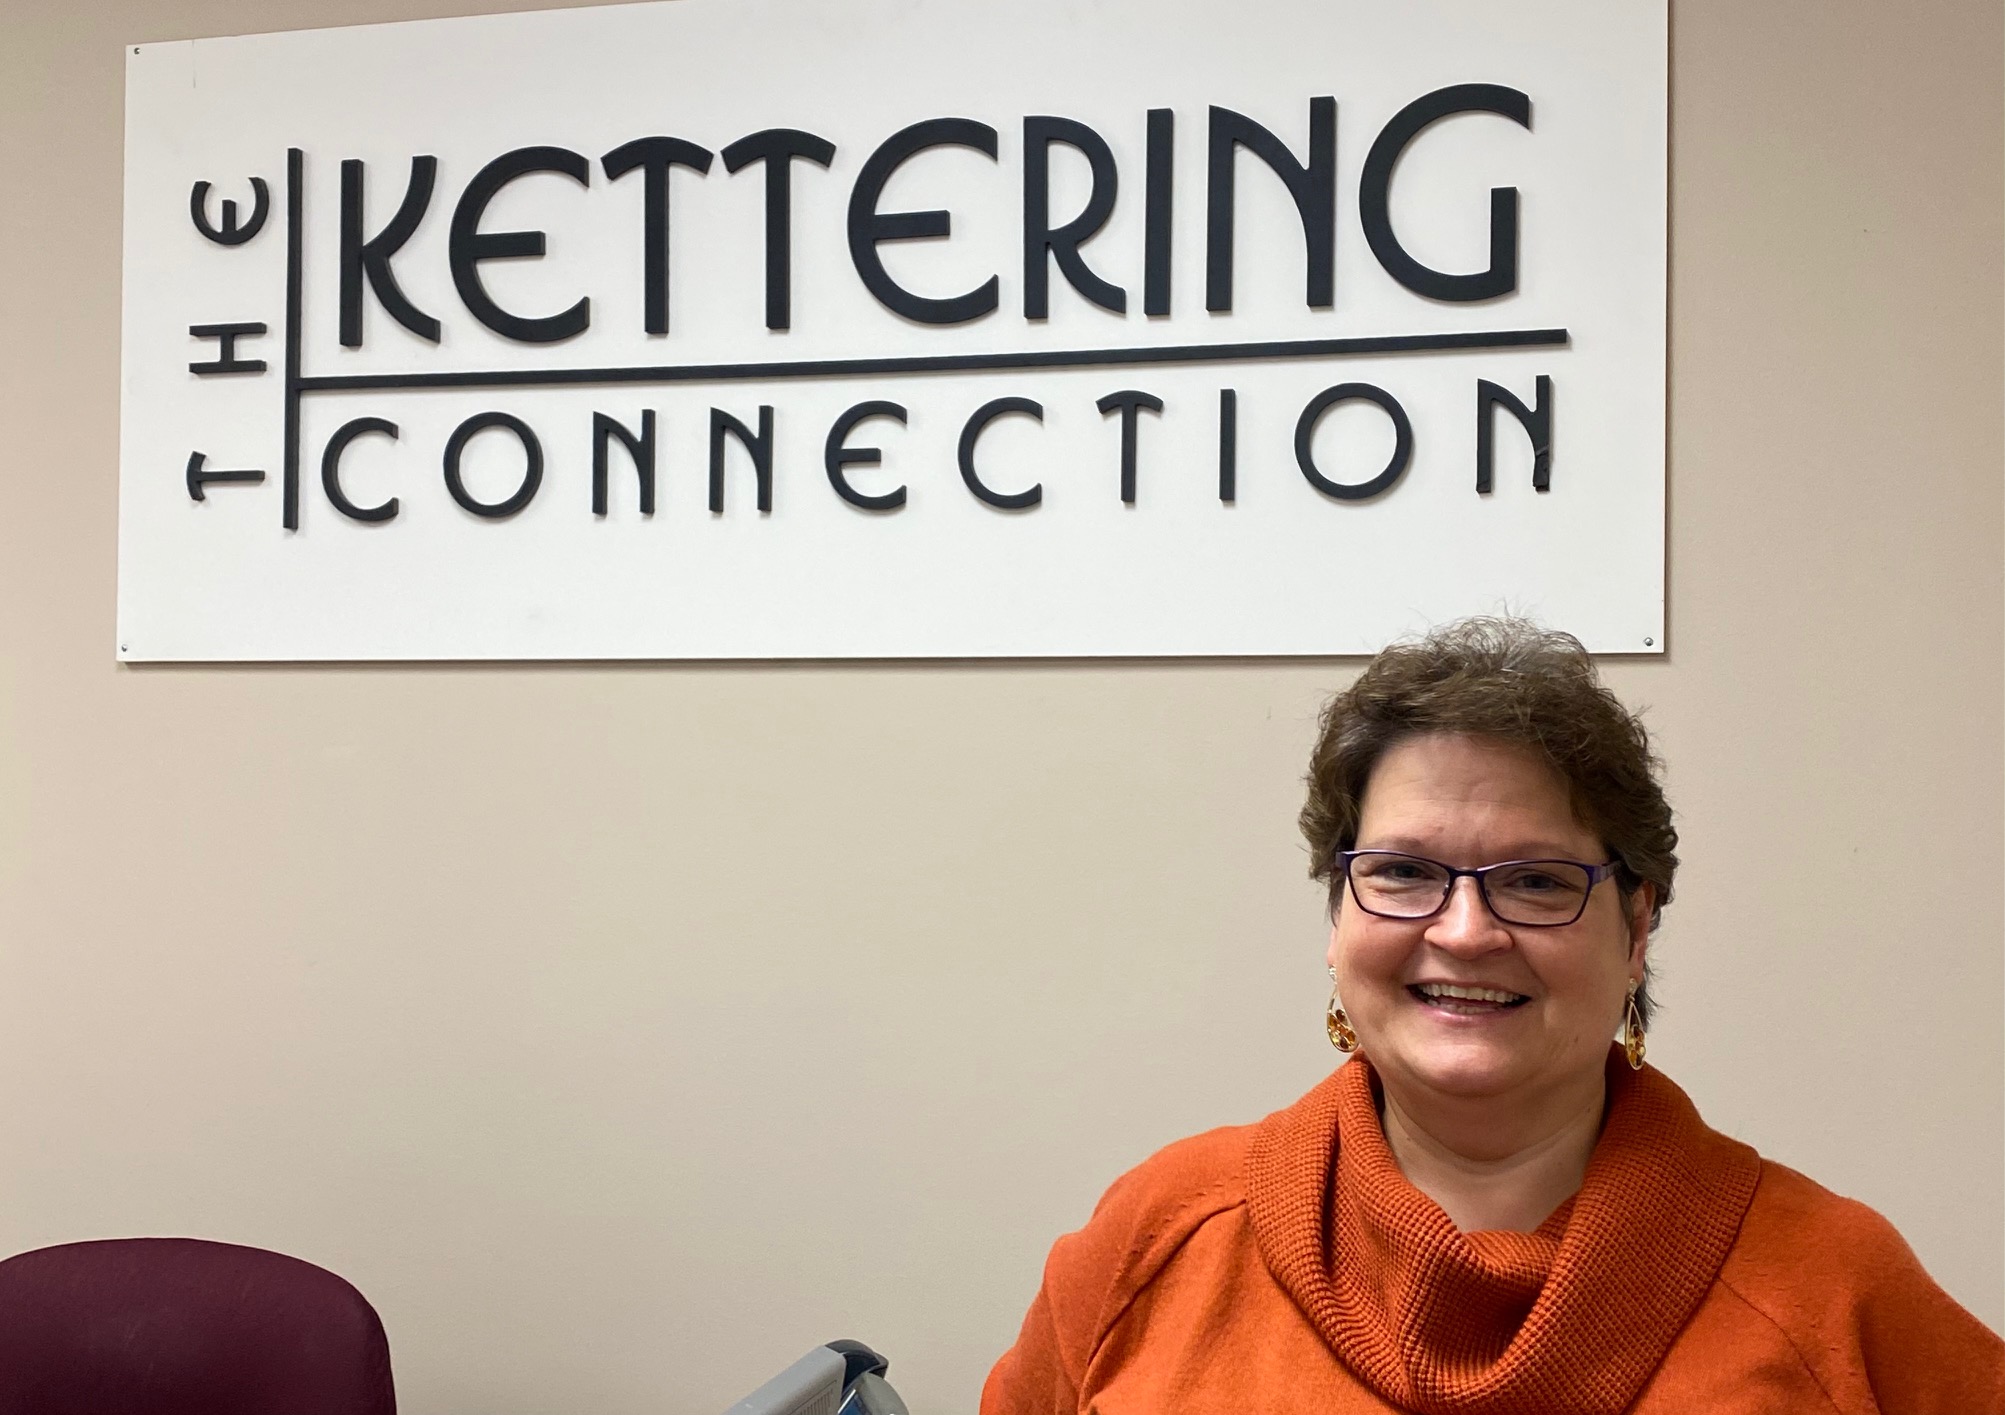 Vickie Carraher is senior services coordinator for the city of Kettering